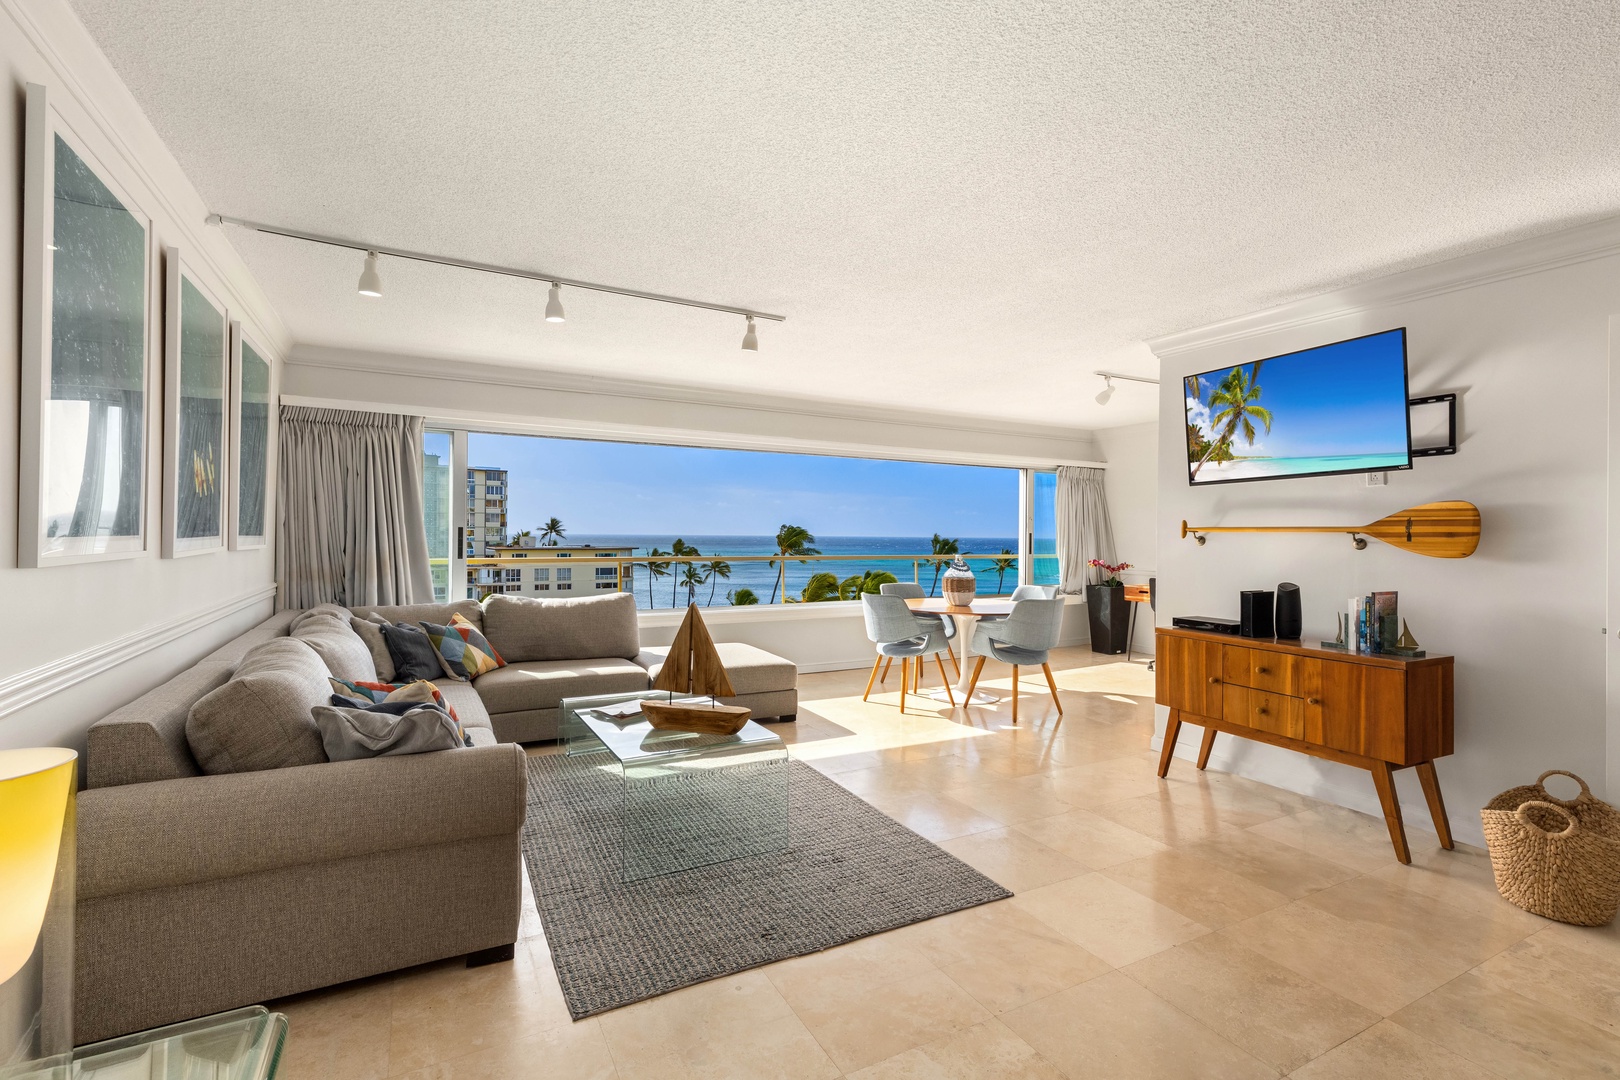 Honolulu Vacation Rentals, Colony Surf Getaway - Plush sofas with open space, welcoming the island breeze.